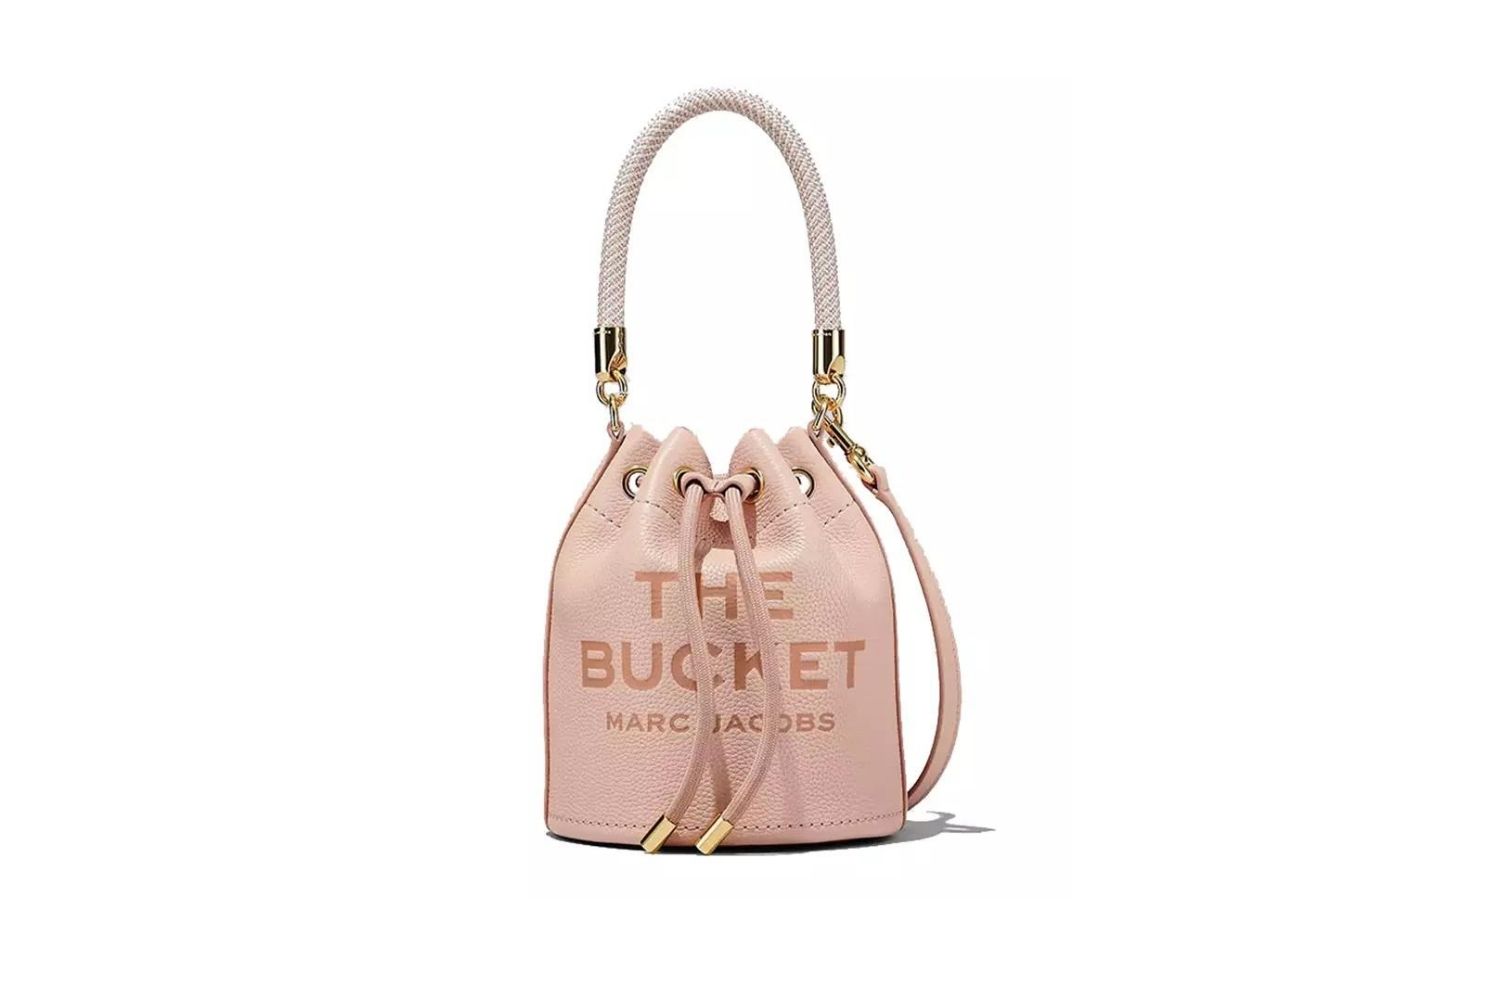 15-enigmatic-facts-about-marc-jacobs-bucket-bag